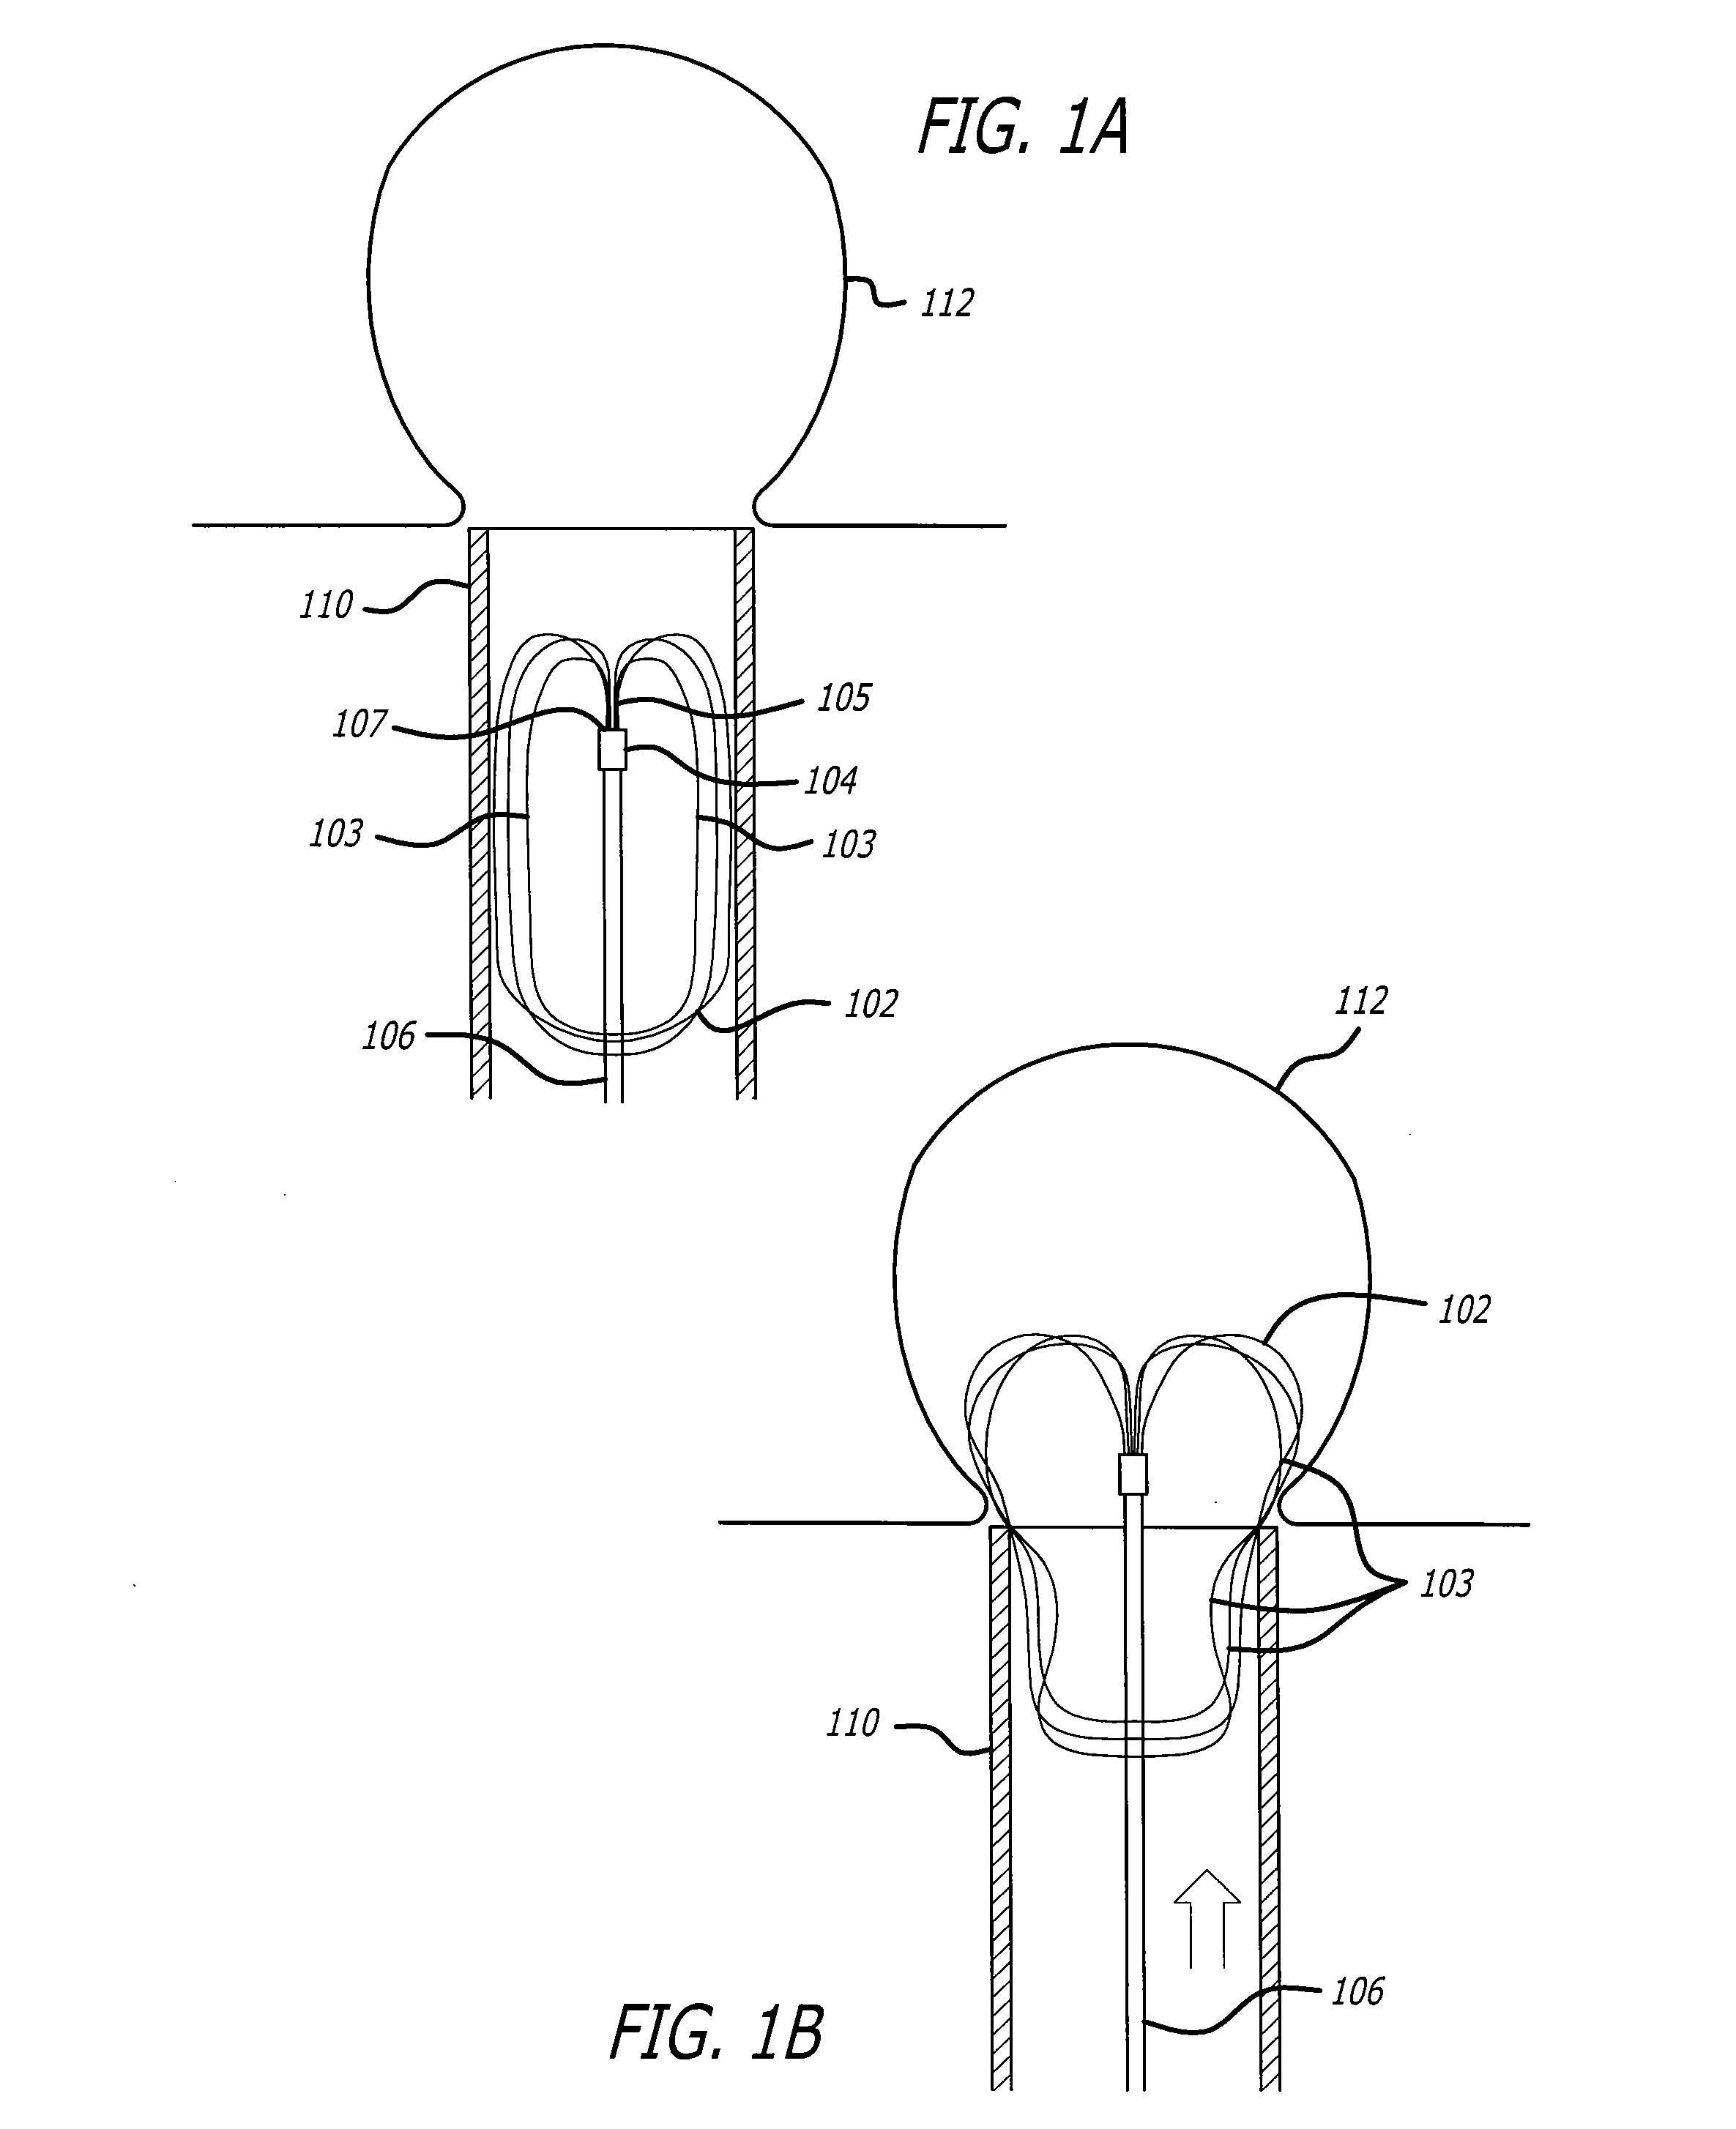 Self-expandable aneurysm filling device, system and method of placement